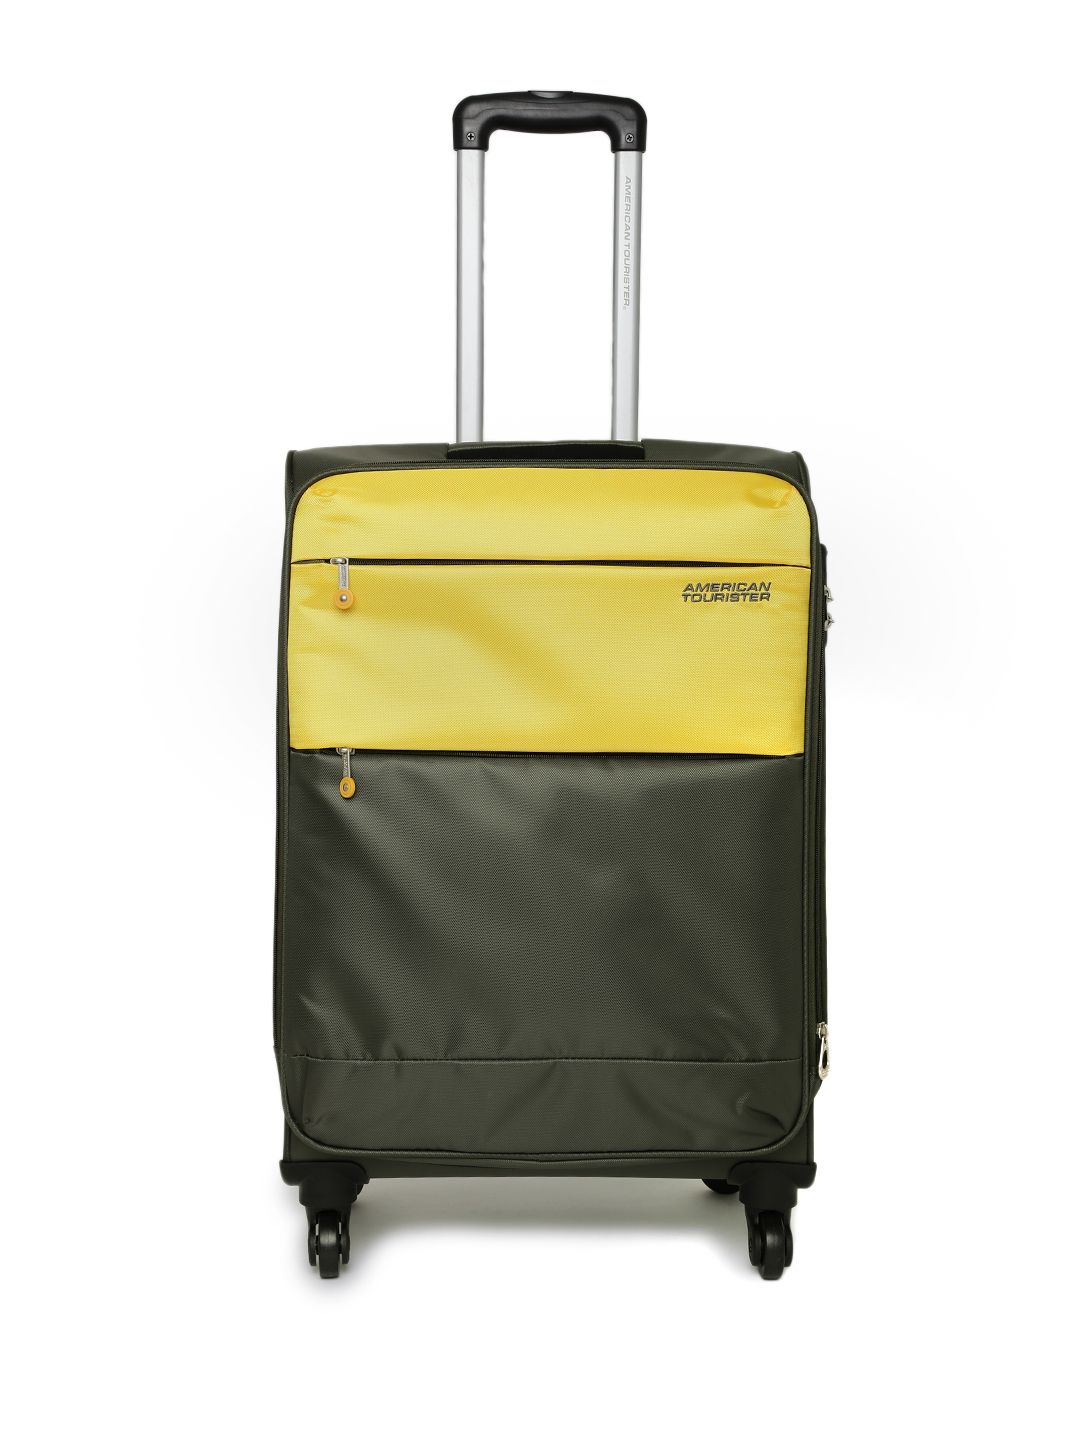 American Tourister Trolley Bags Online Shopping India | City of Kenmore, Washington